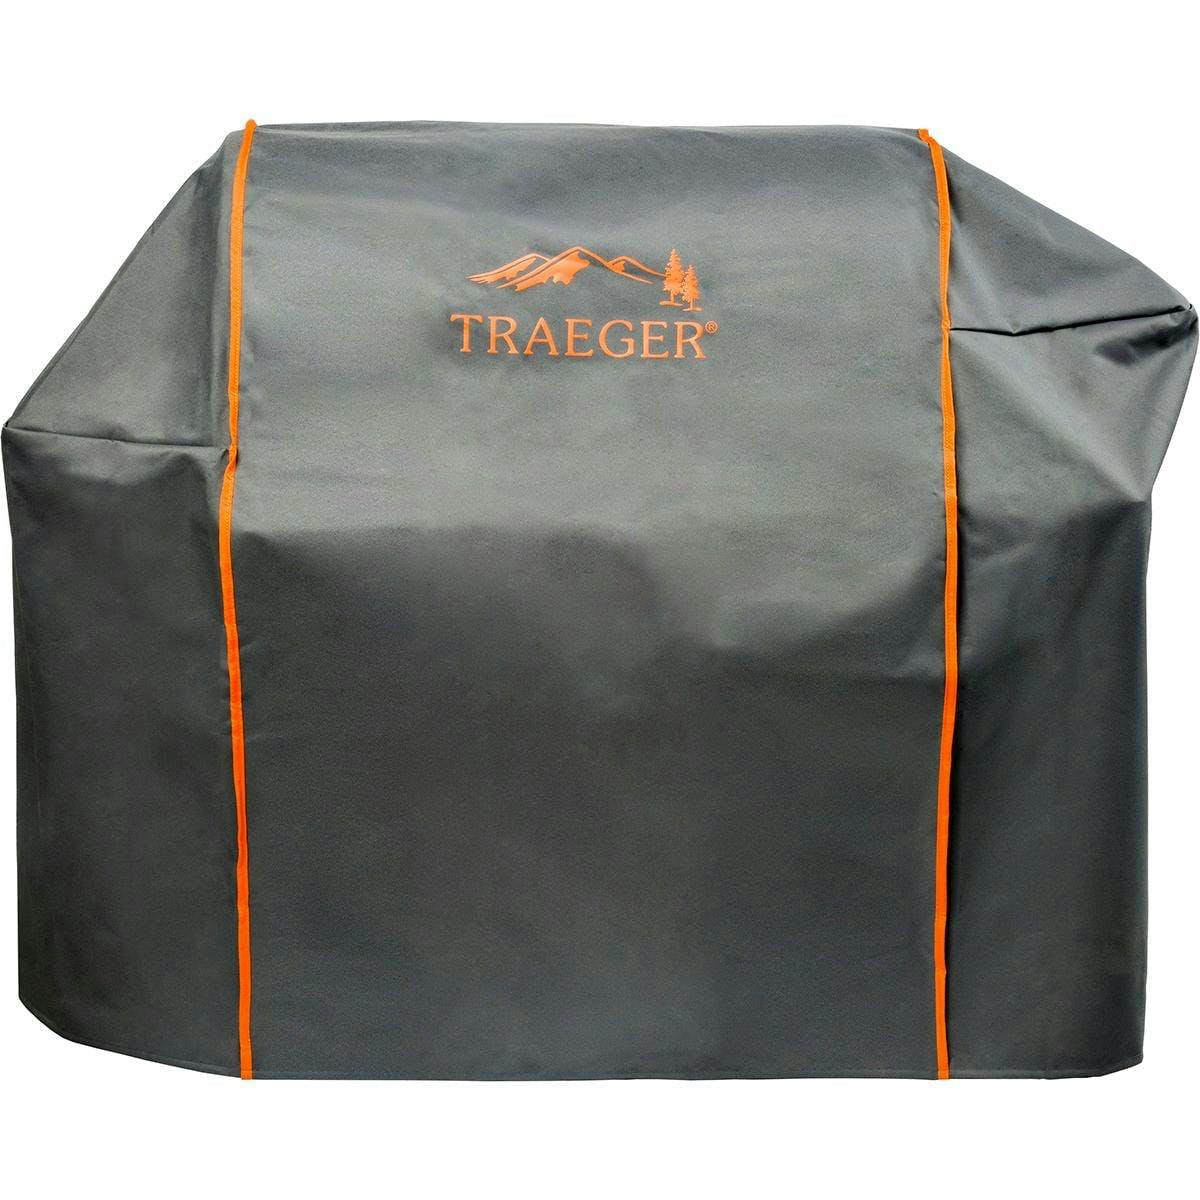 Traeger Full Length Grill Cover For Timberline 850 Series Pellet Grills